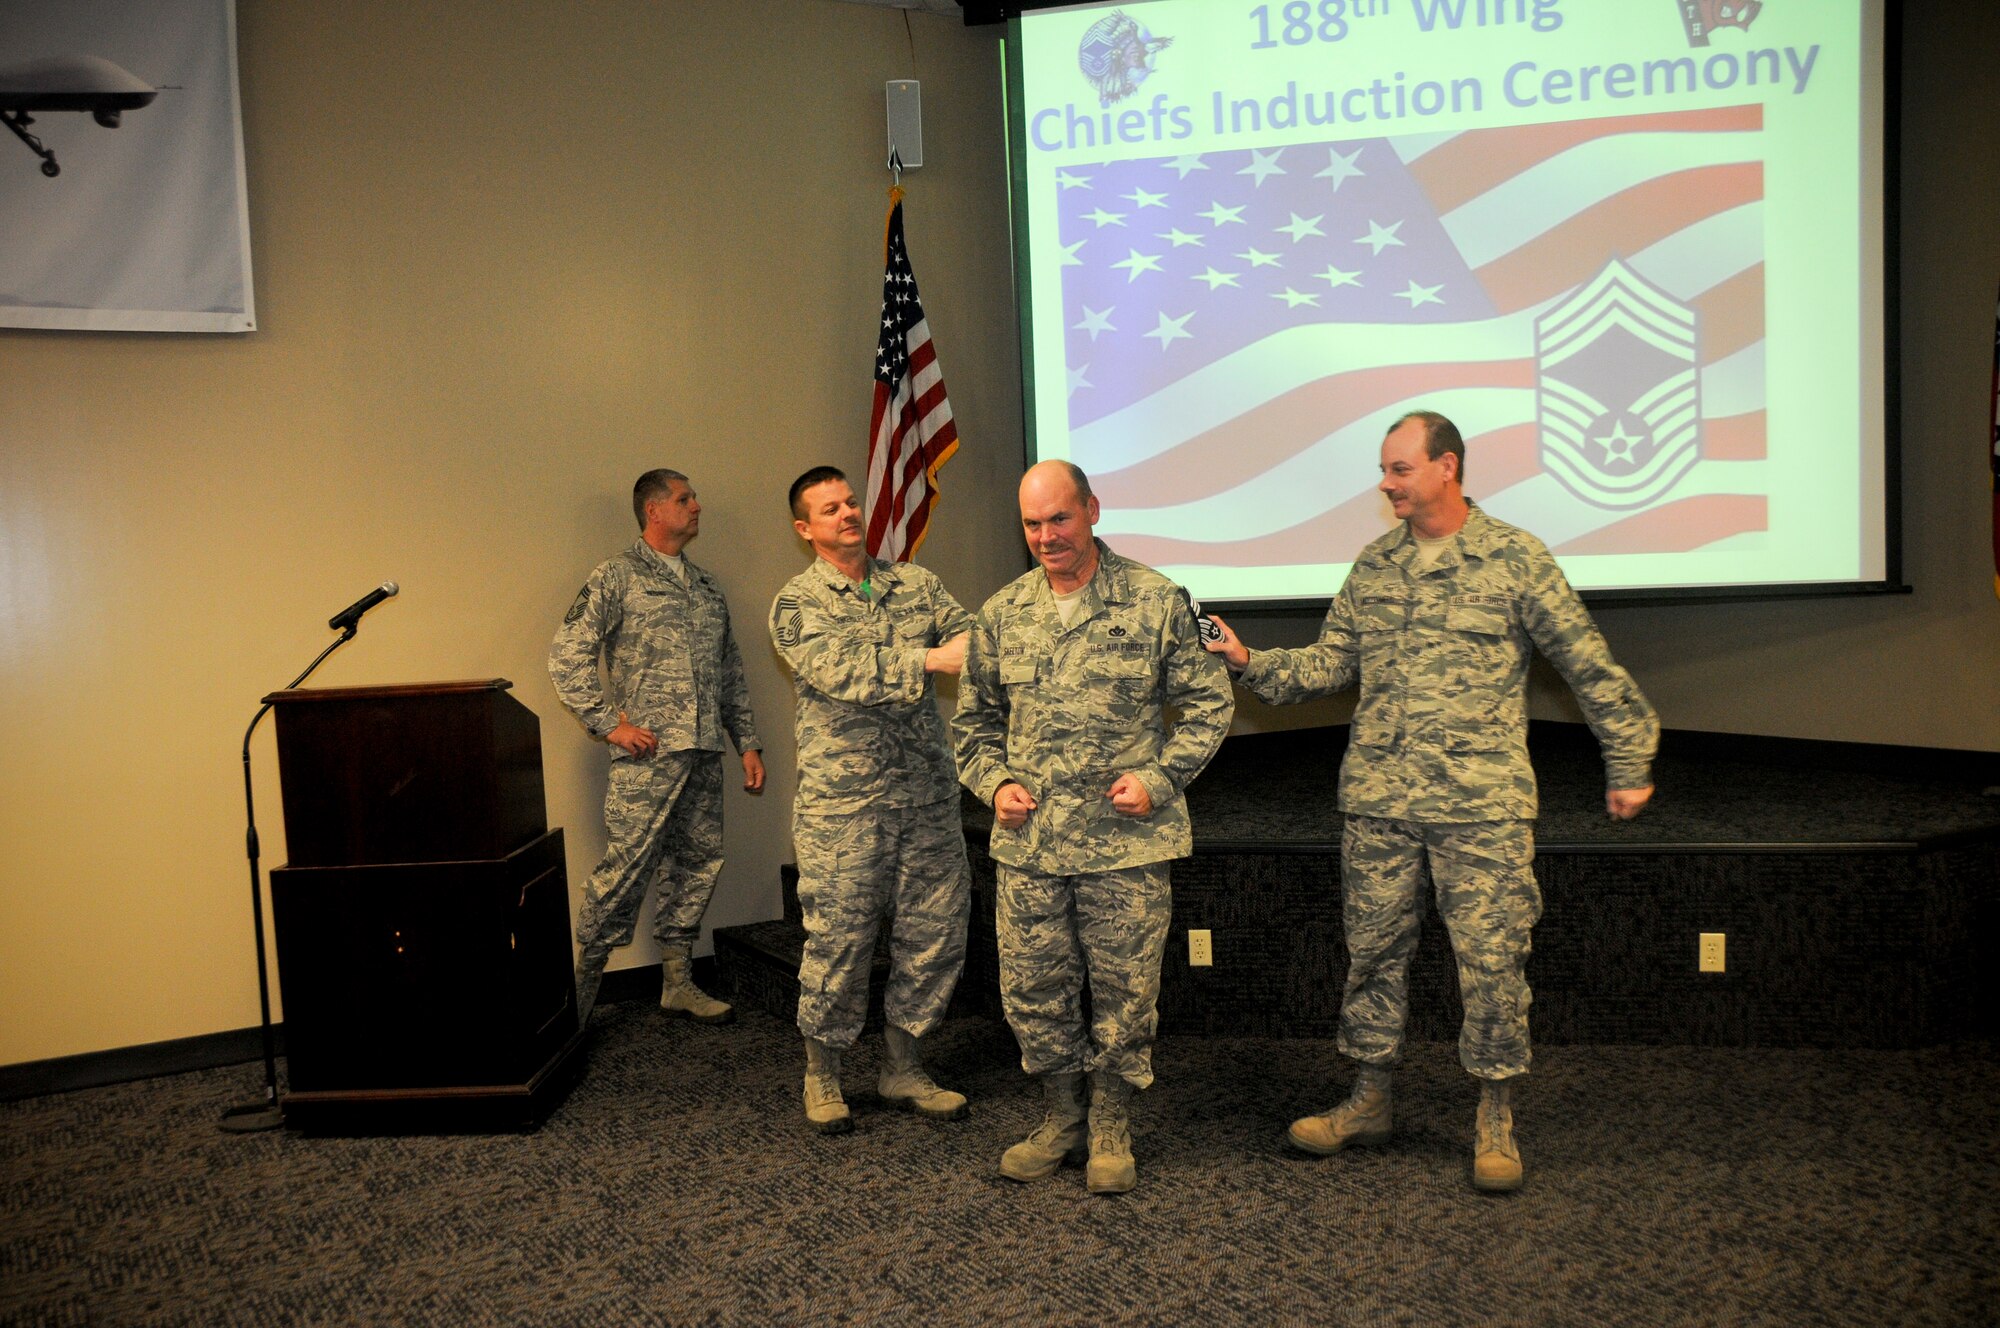 Member of the 188th Wing gather together for the promotion ceremony of Chief Master Sgt. Gary Skelton, Chief of operations for the RED HORSE training center, at Ebbing Air National Guard Base, Fort Smith, Ark., Dec. 7, 2014. Skelton has served 35 years in the Air National Guard and the 188th Wing. (U.S. Air National Guard photo by Airman 1st Class Cody Martin/Released)